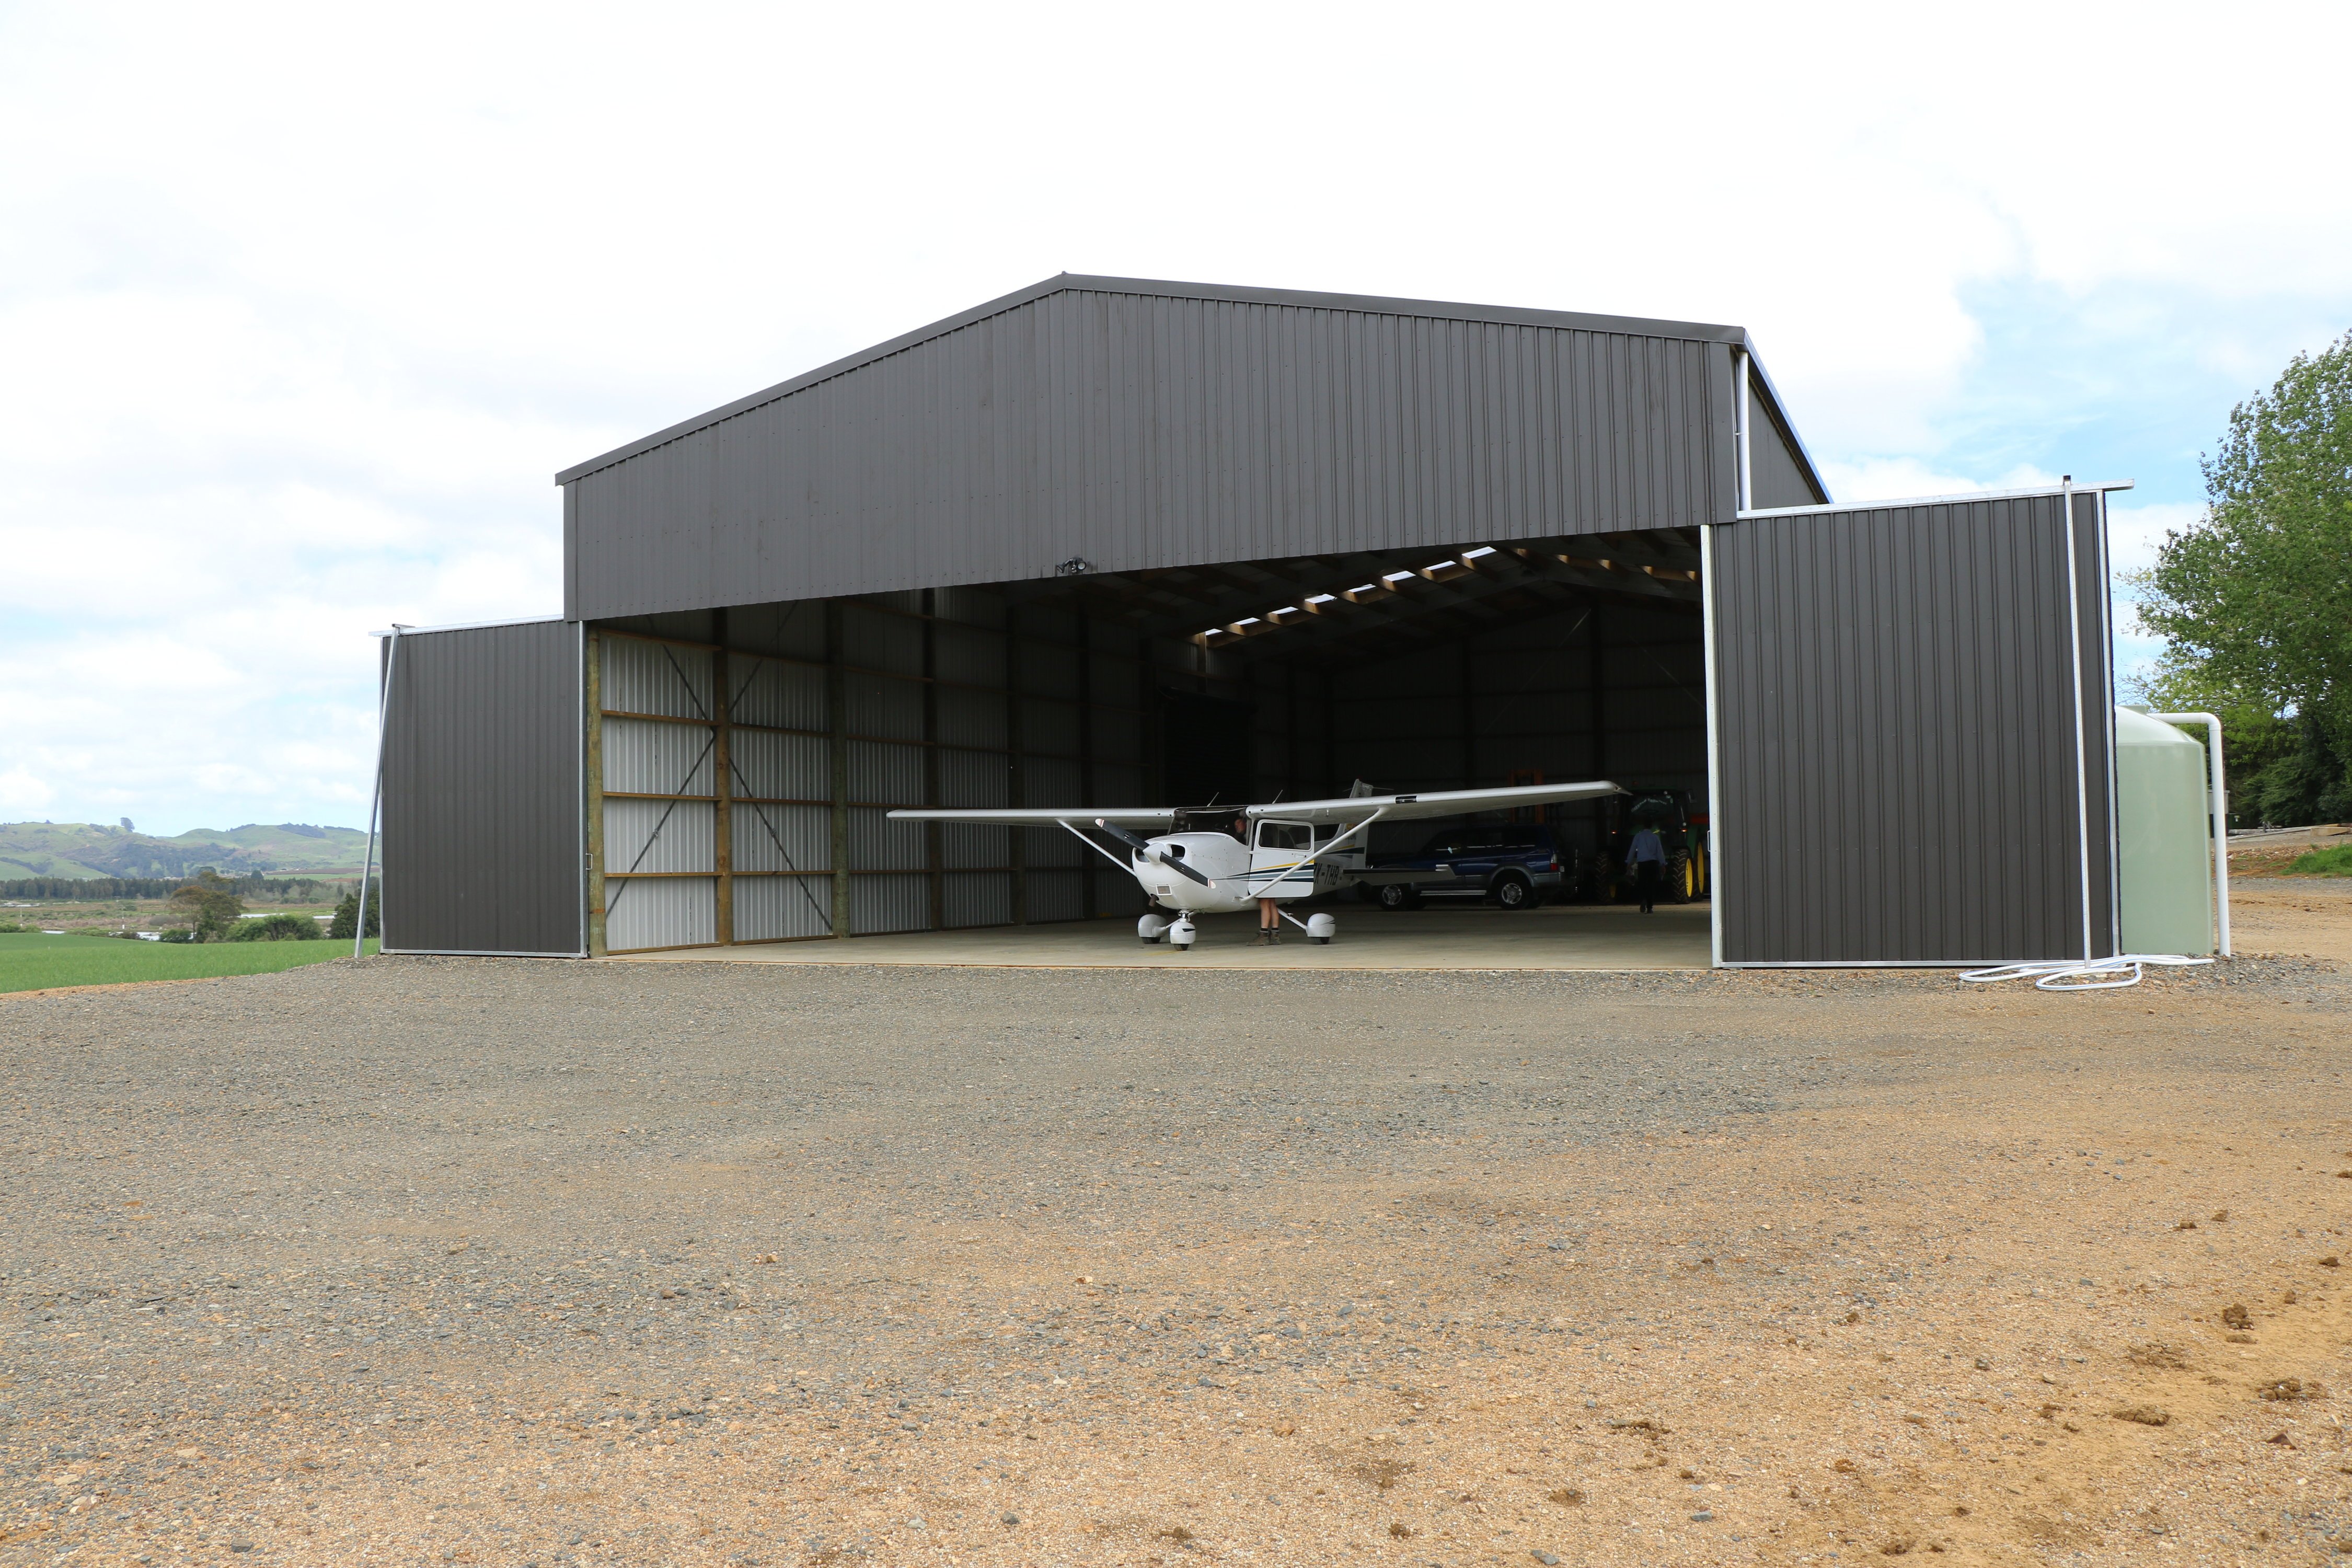 The extra wide bay makes it easy to place your aircraft inside the hangar